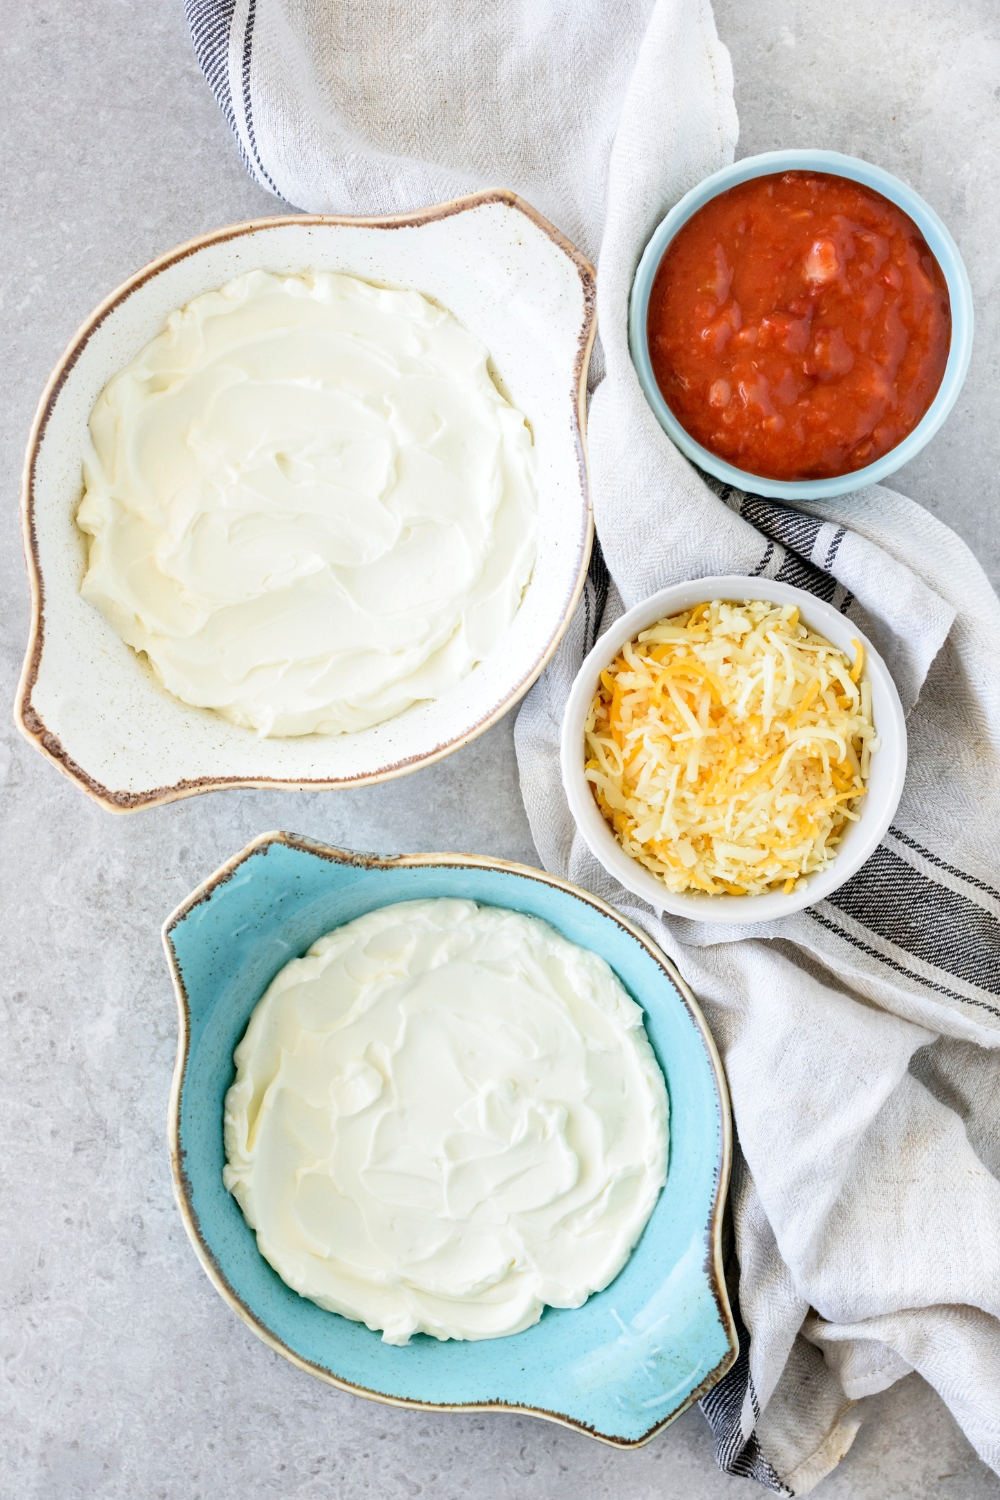 Two baking dishes filled with an even layer of cream cheese. Next to the two baking dishes are bowls of chili and shredded cheese.